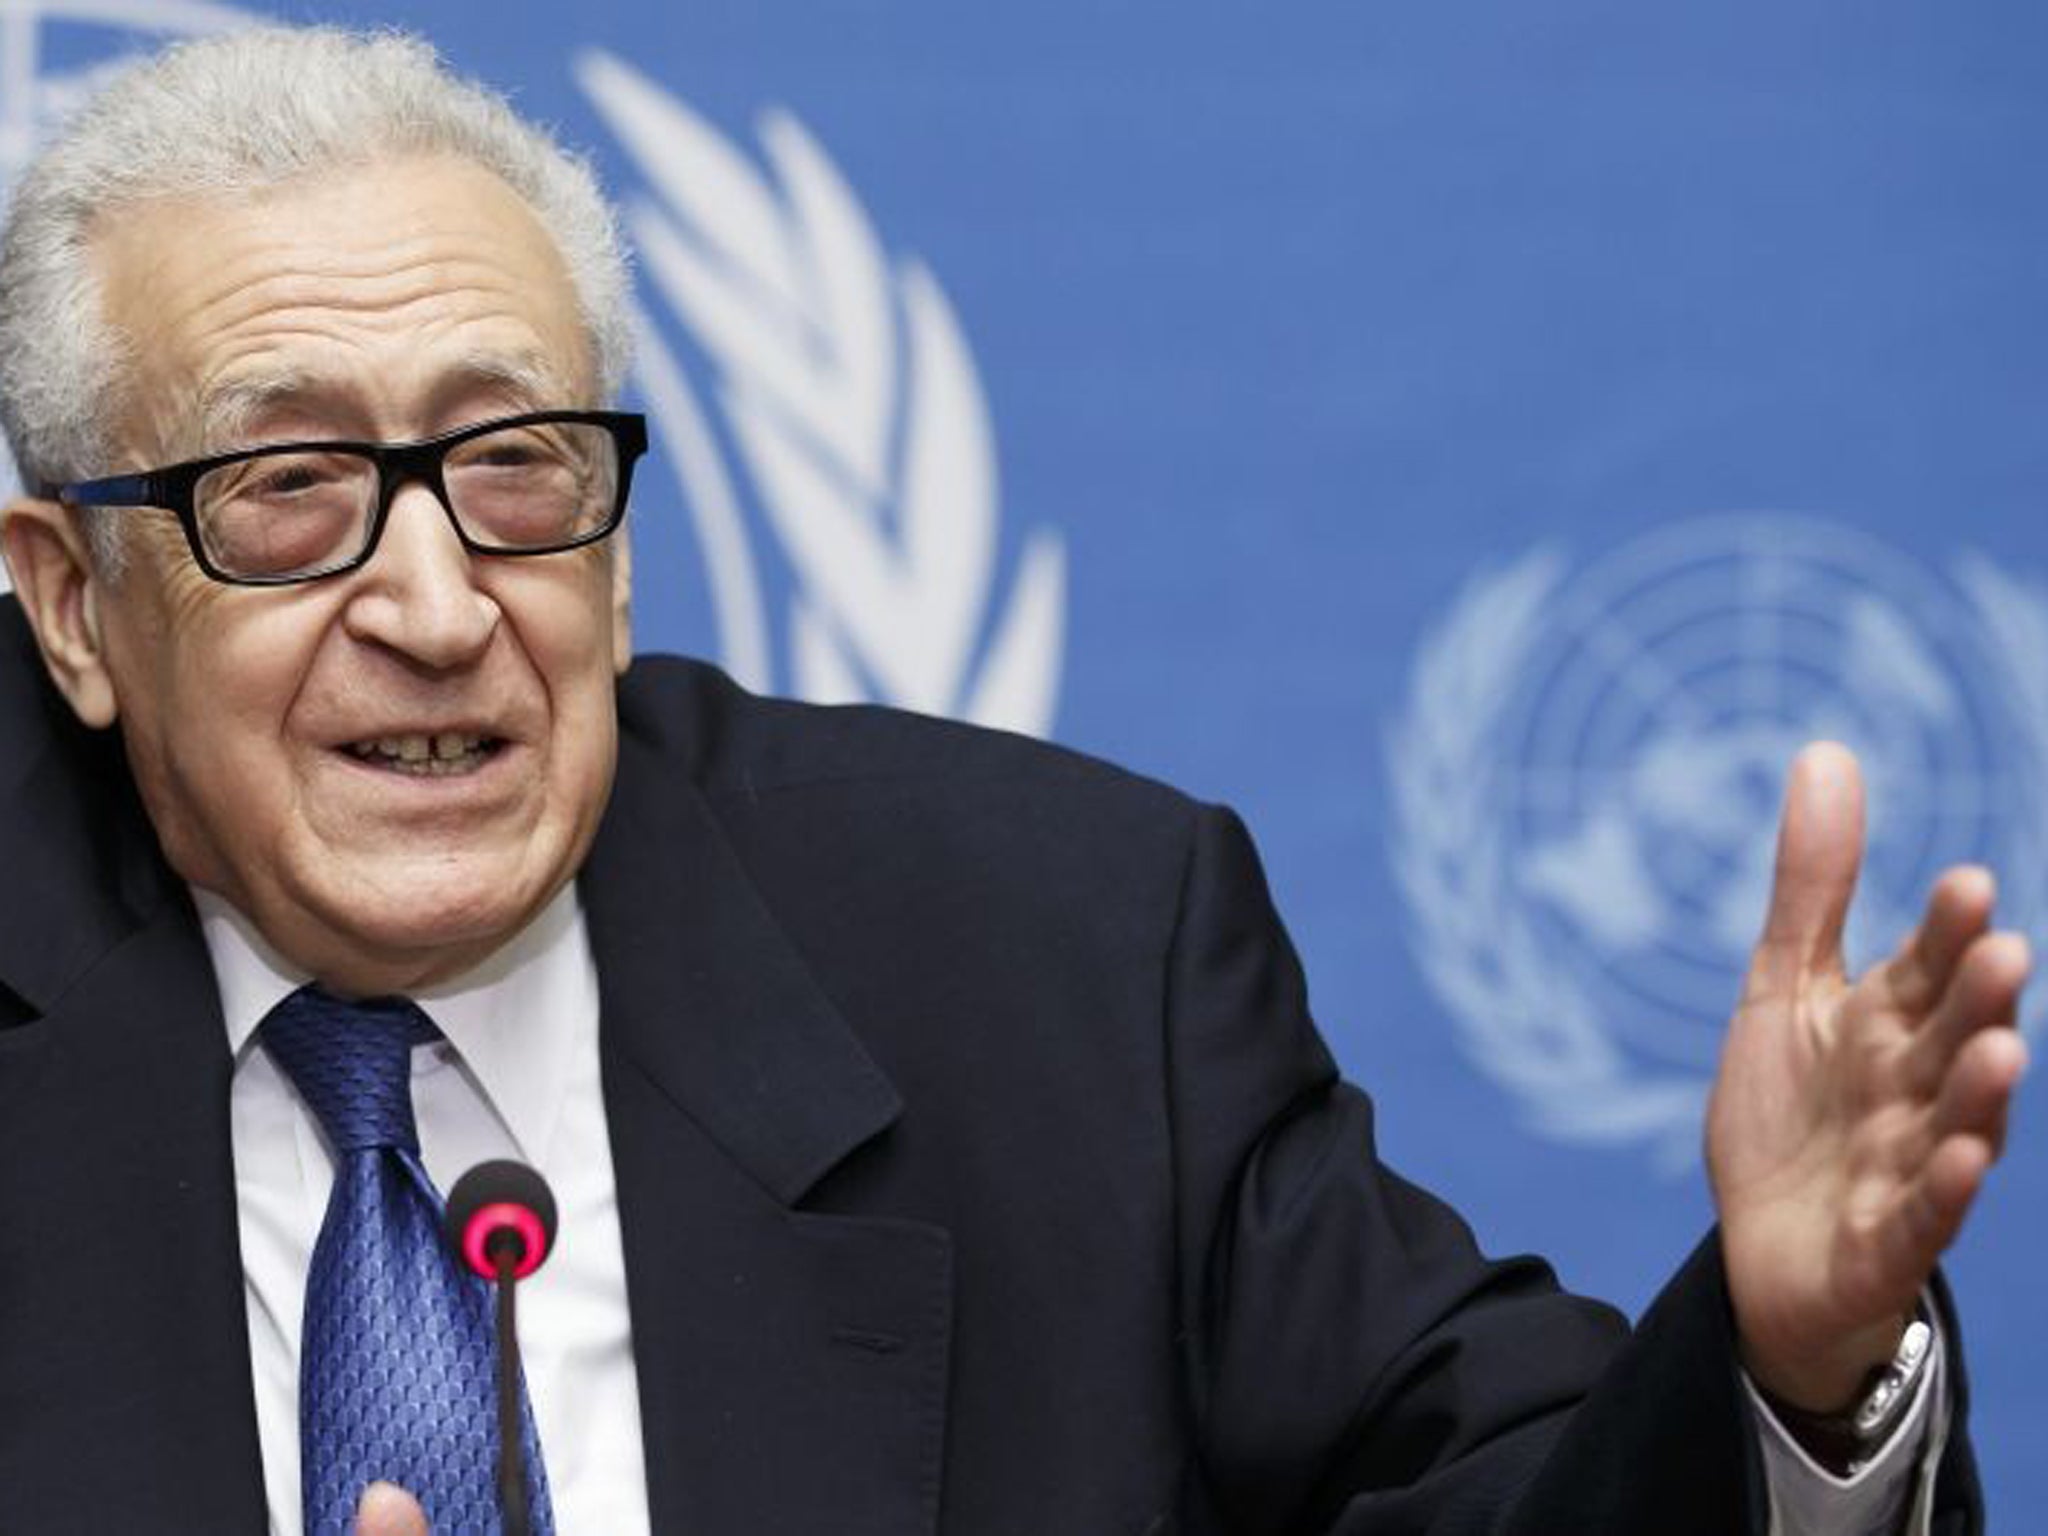 The UN-Arab League mediator Lakhdar Brahimi was forced to end the peace talks between the Syrian government and opposition